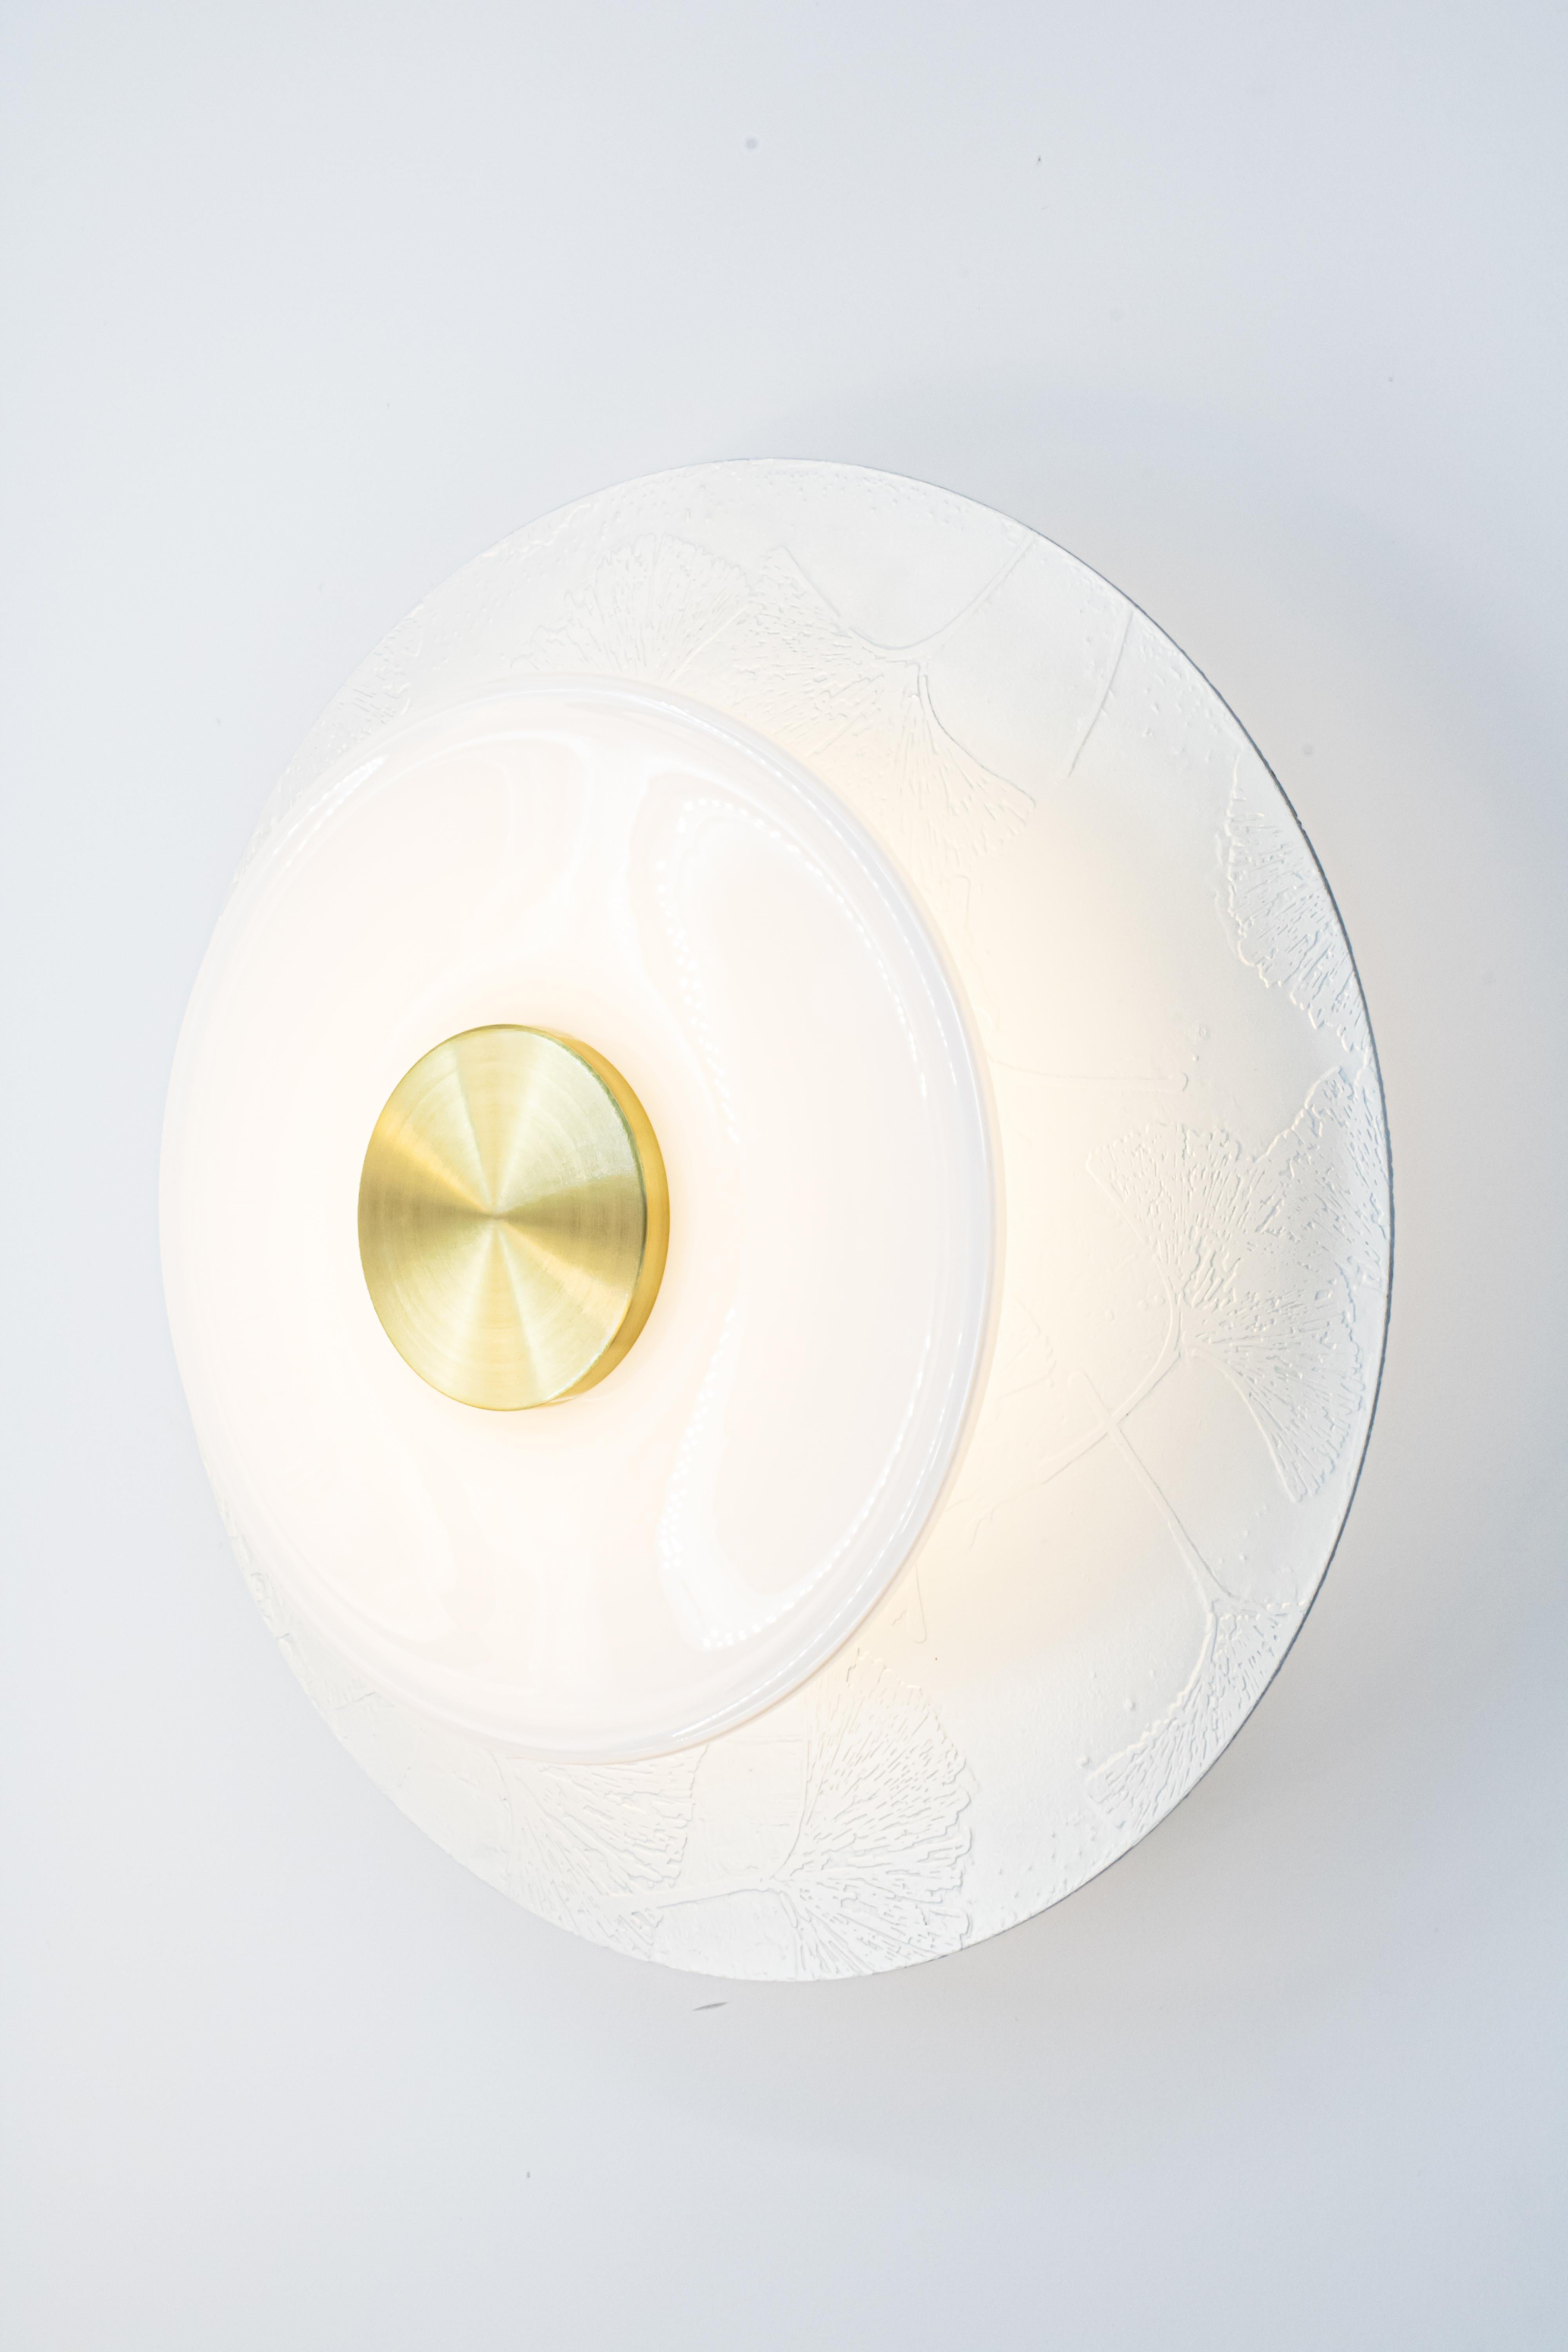 Our wall mounted Klein Sconce offers an atmospheric glow softened by a hand blown glass rondelle in the front while still giving off ample back lighting. With multiple brass textures and finishes available, the Klein Sconce can be customized in a